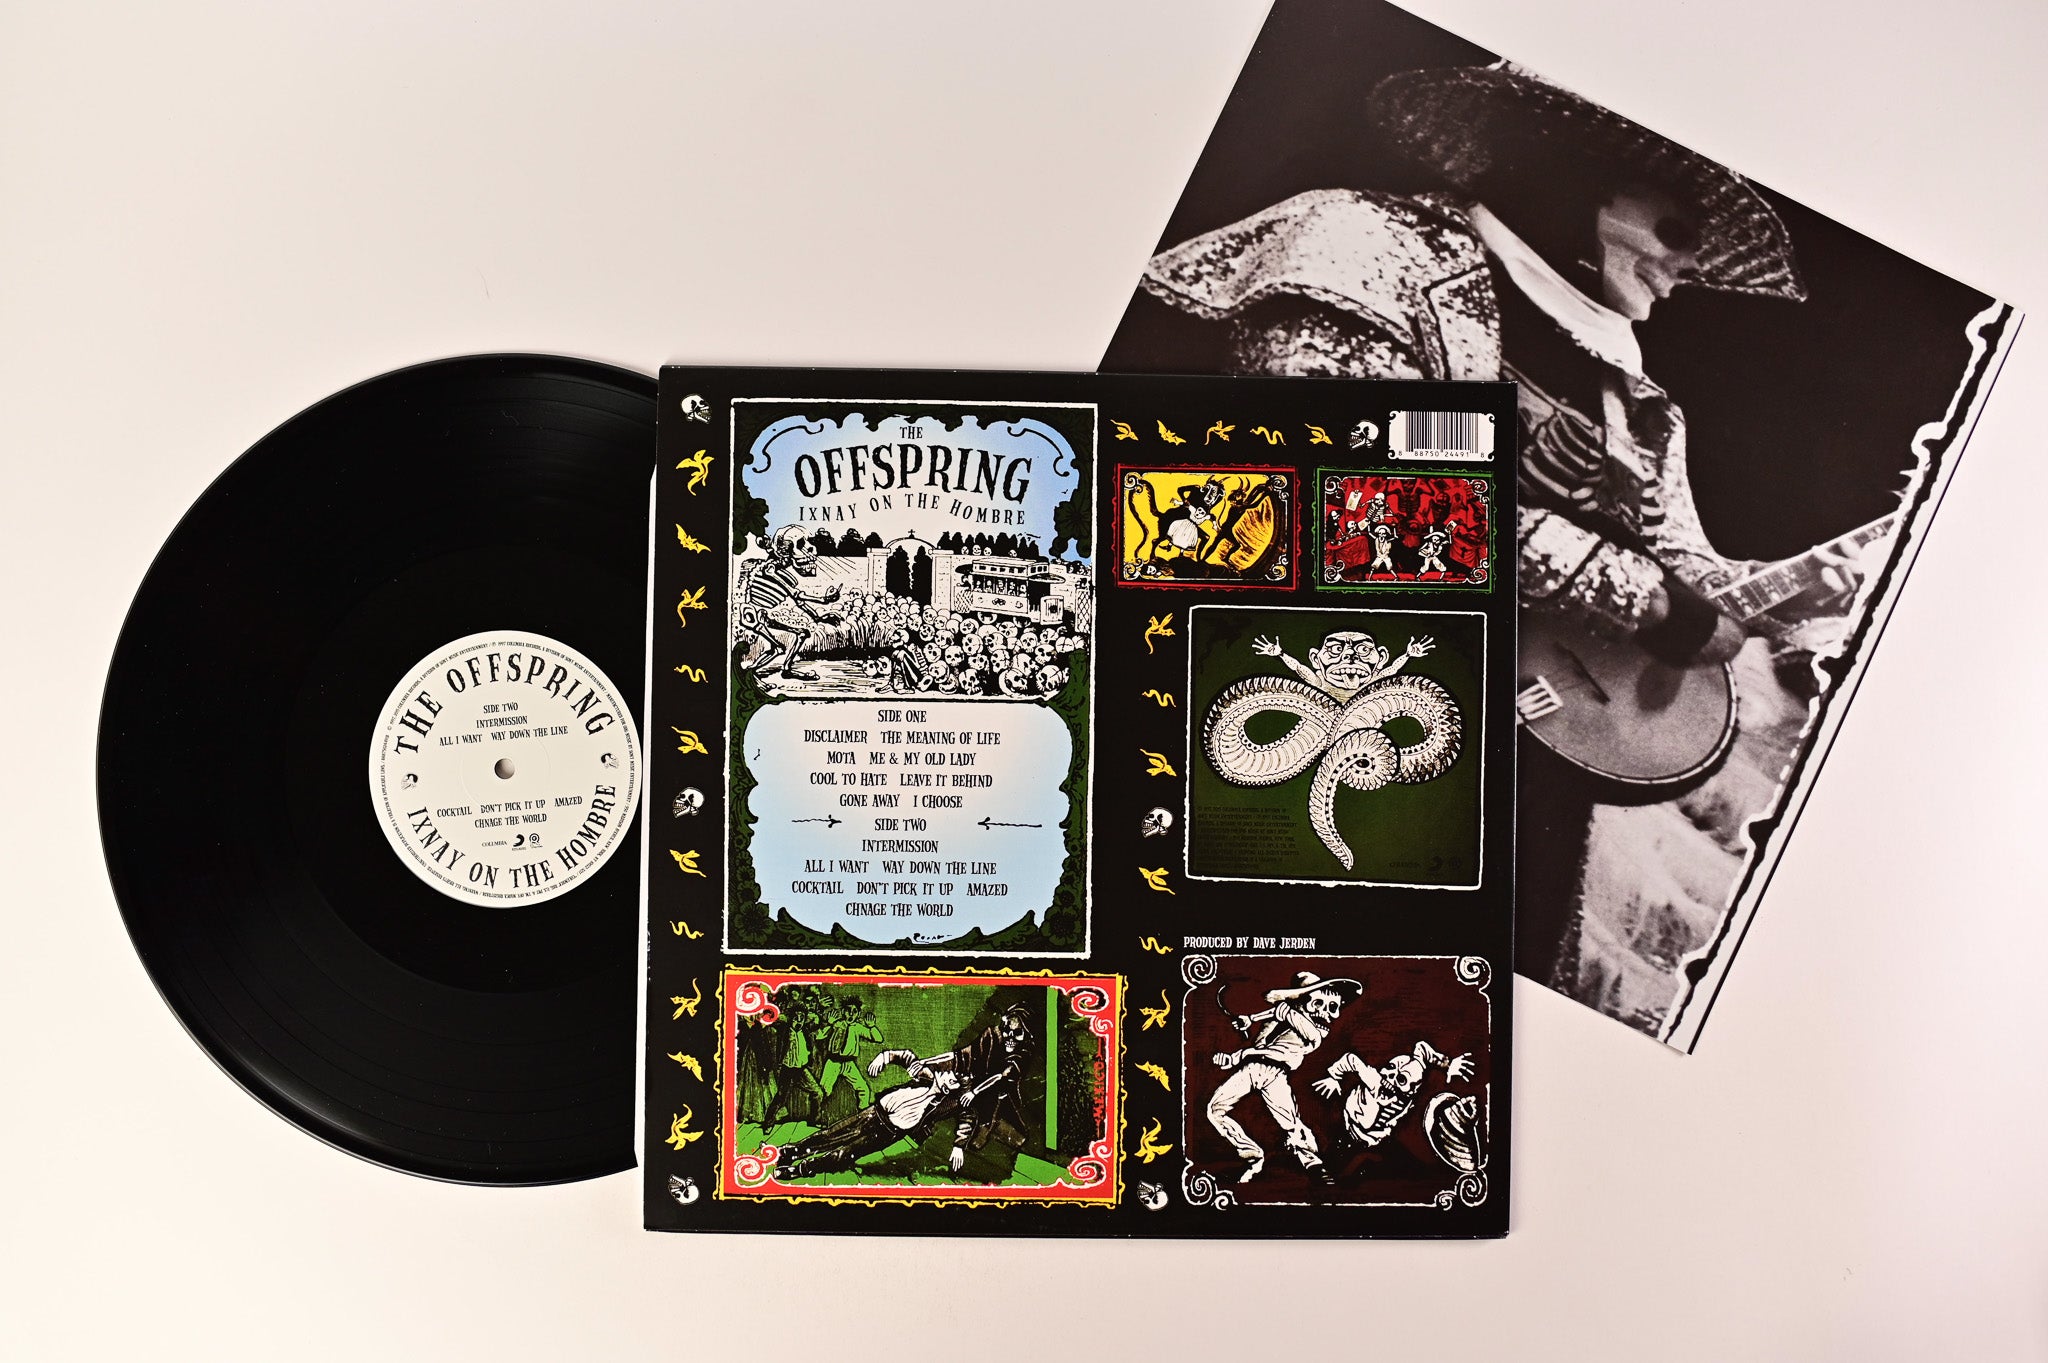 The Offspring - Ixnay On The Hombre on ORG Ltd Reissue